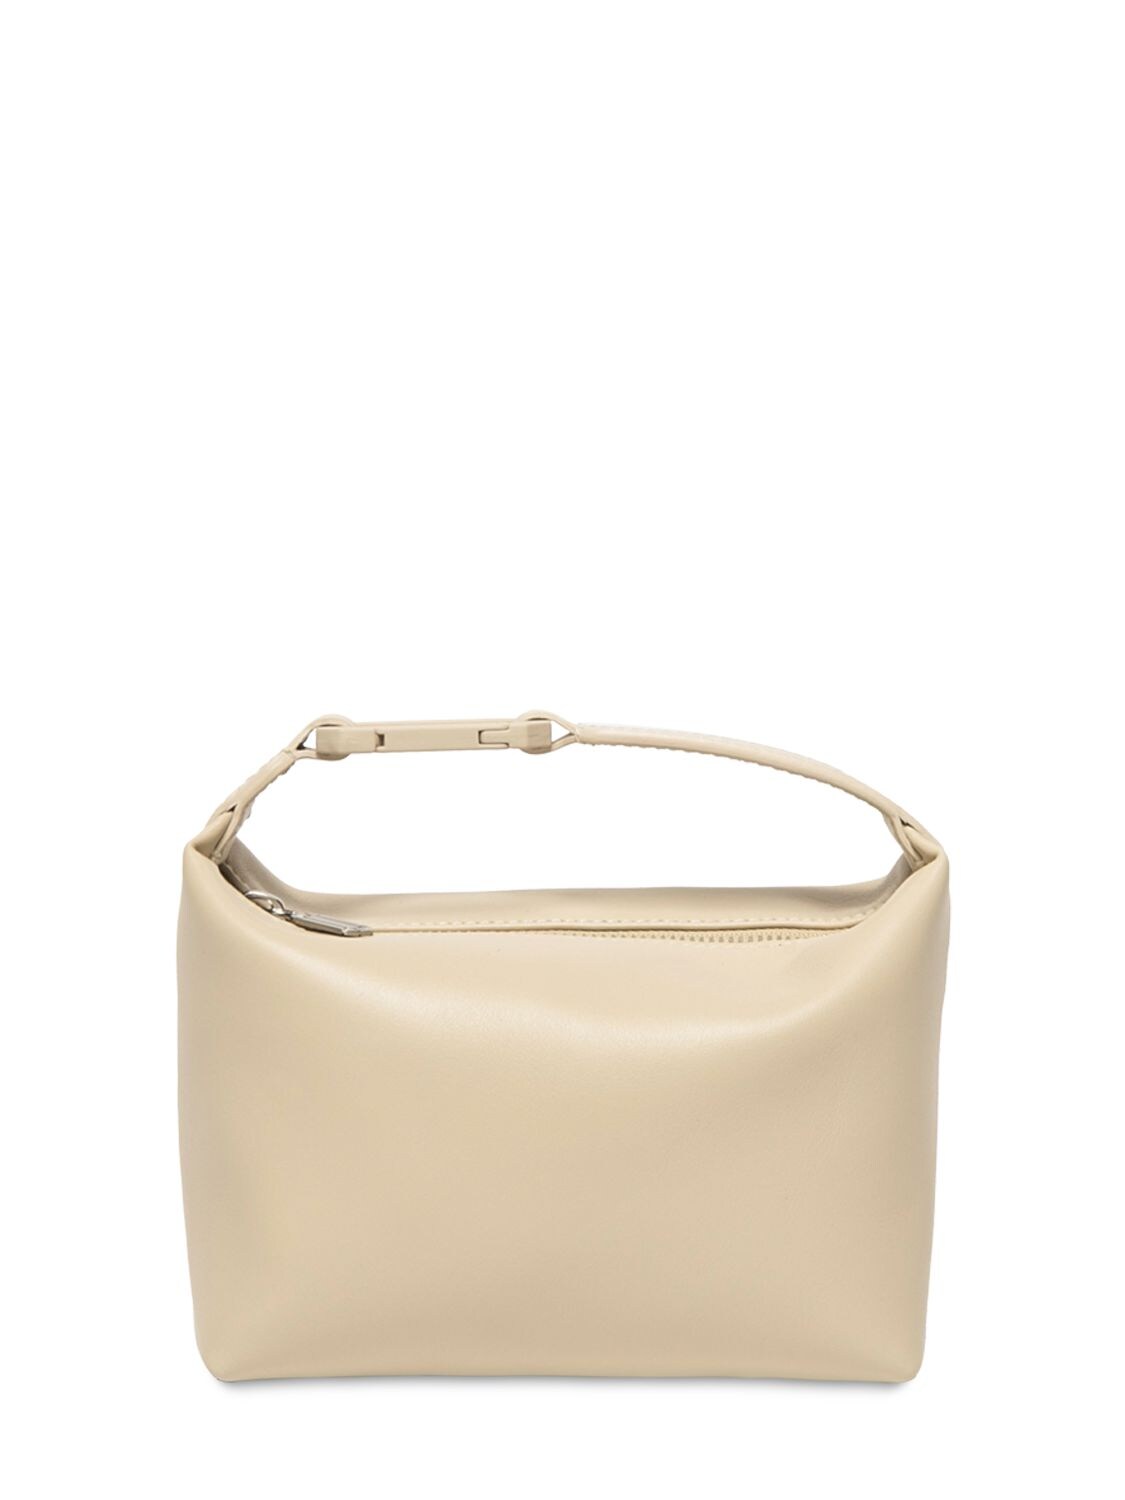 Eéra Moonbag Leather Top Handle Bag In Off White